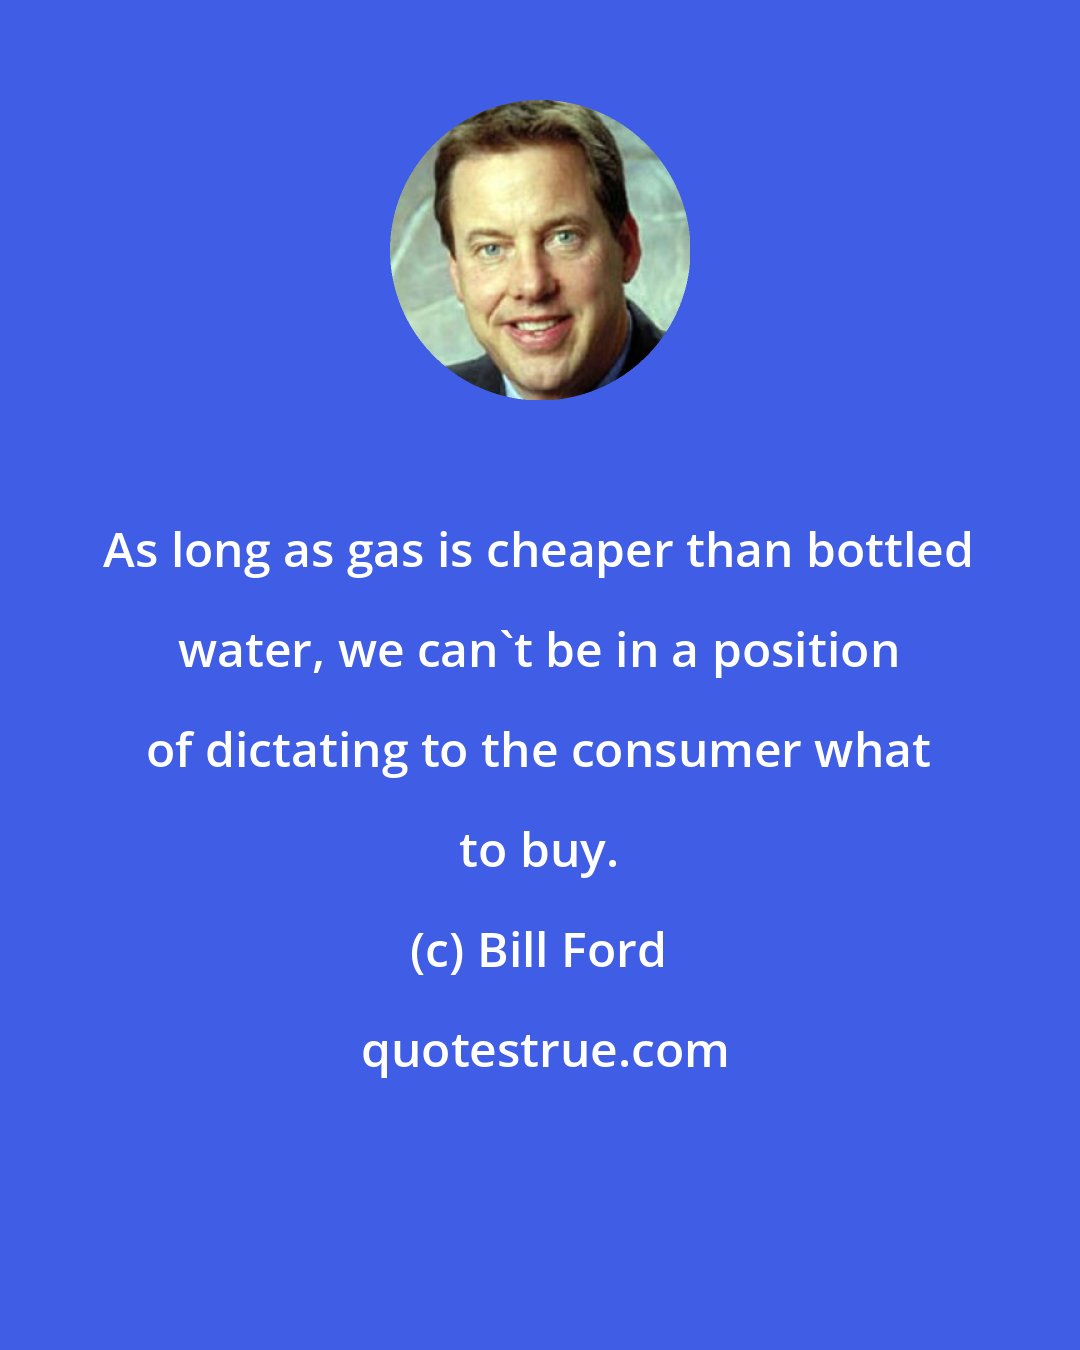 Bill Ford: As long as gas is cheaper than bottled water, we can't be in a position of dictating to the consumer what to buy.